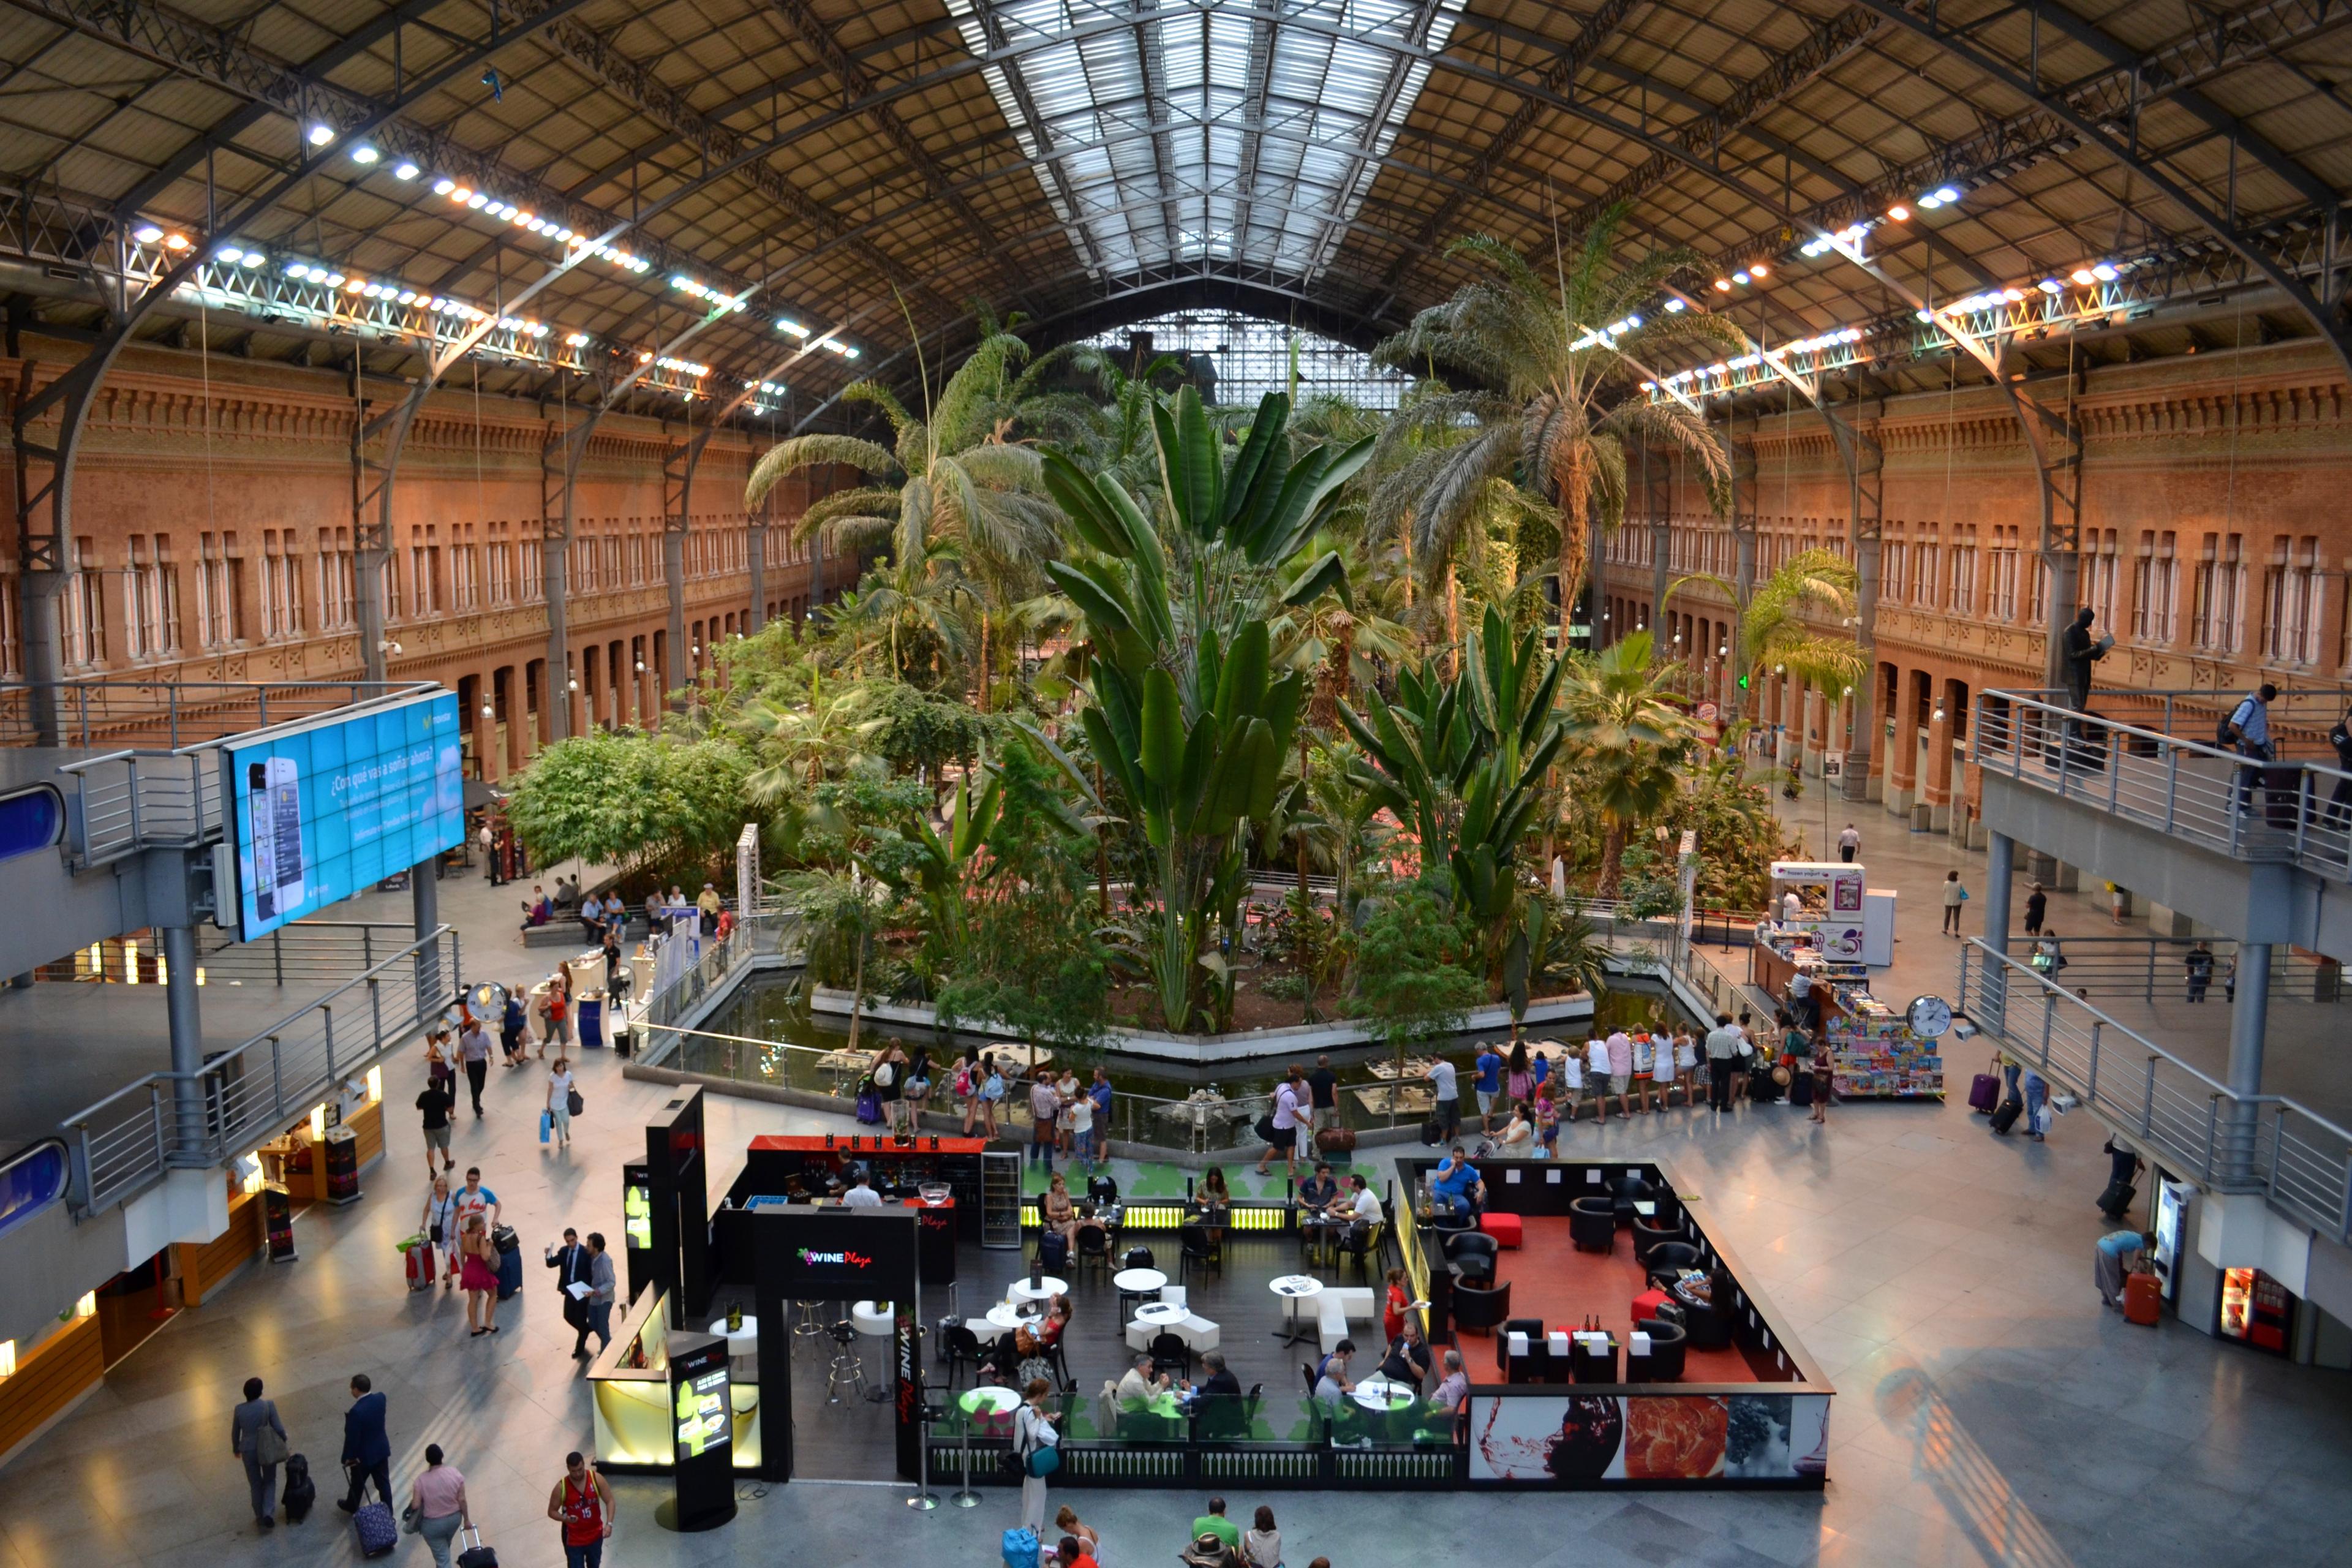 Cover image of this place Atocha trainstation